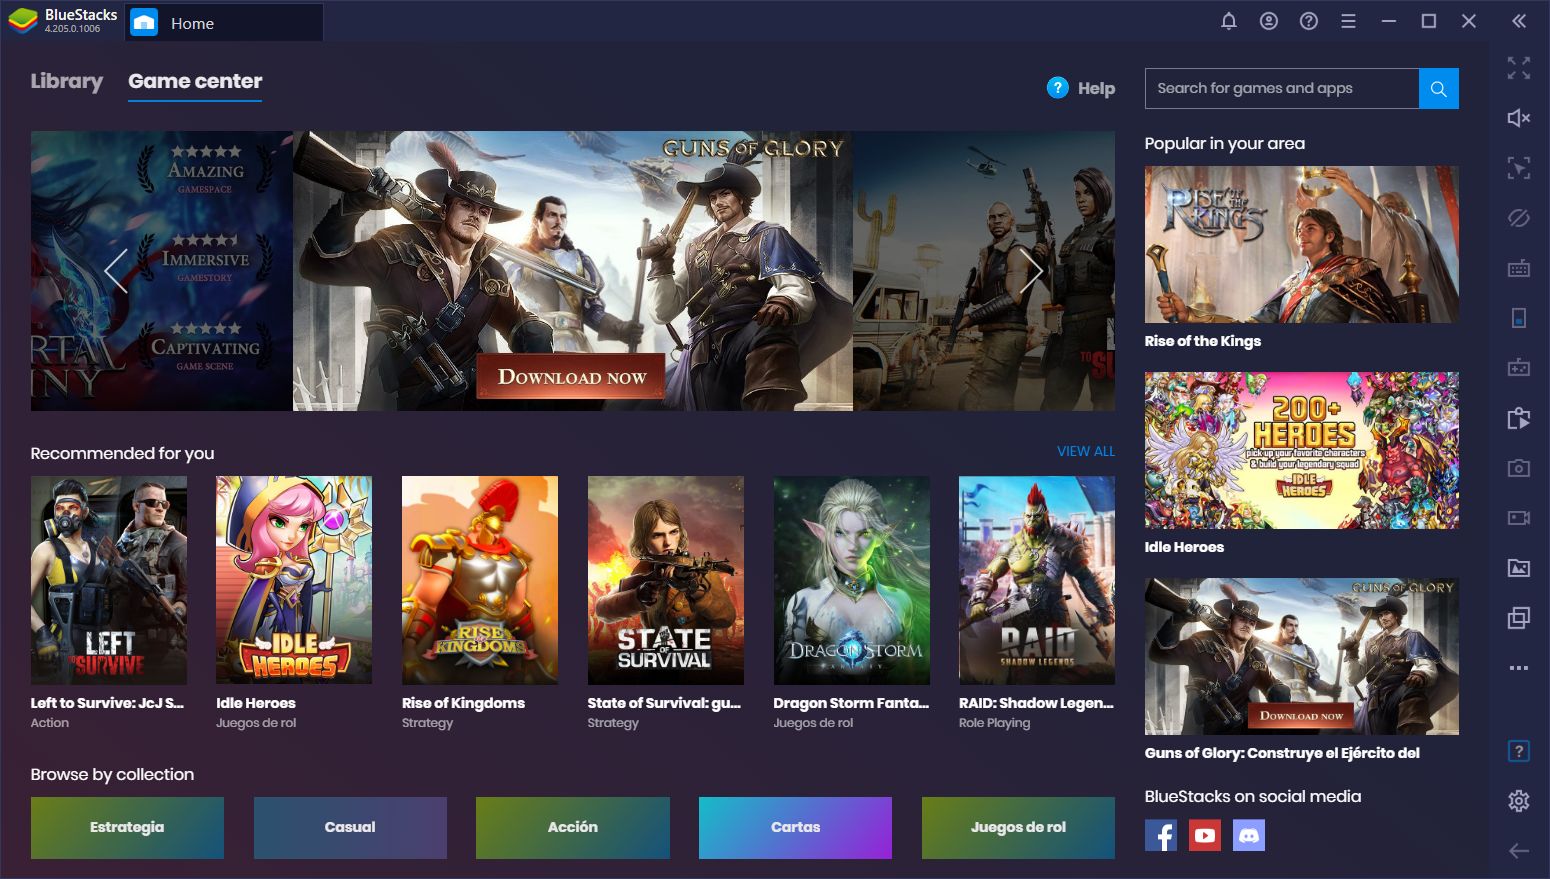 How to save in-game progress using your social media accounts on BlueStacks  – BlueStacks Support